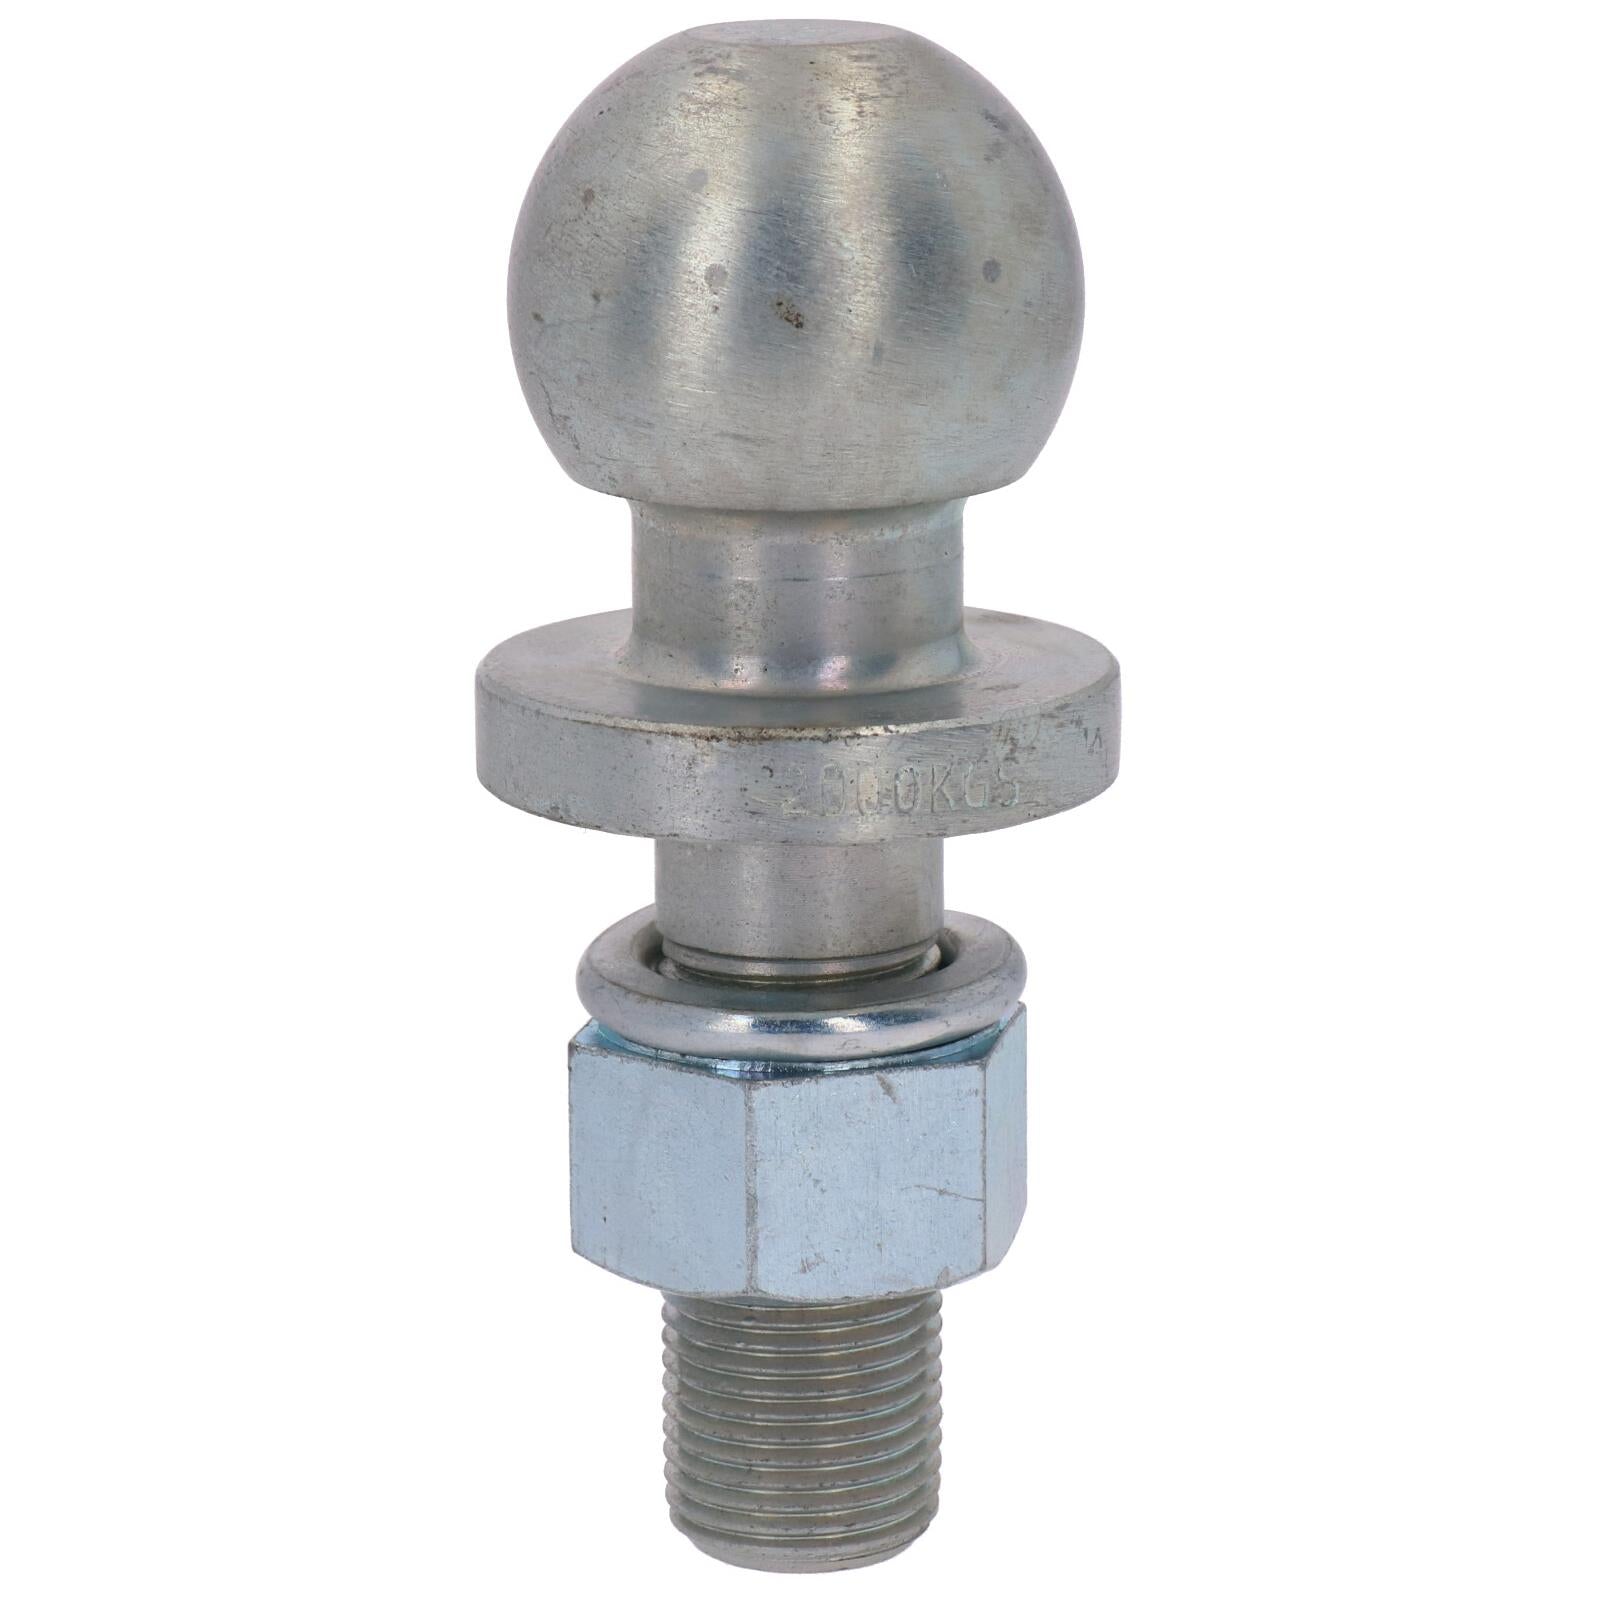 50mm Tow Ball / Bar Threaded Short Type for Recovery, Trike, Quad etc 25mm TR37A